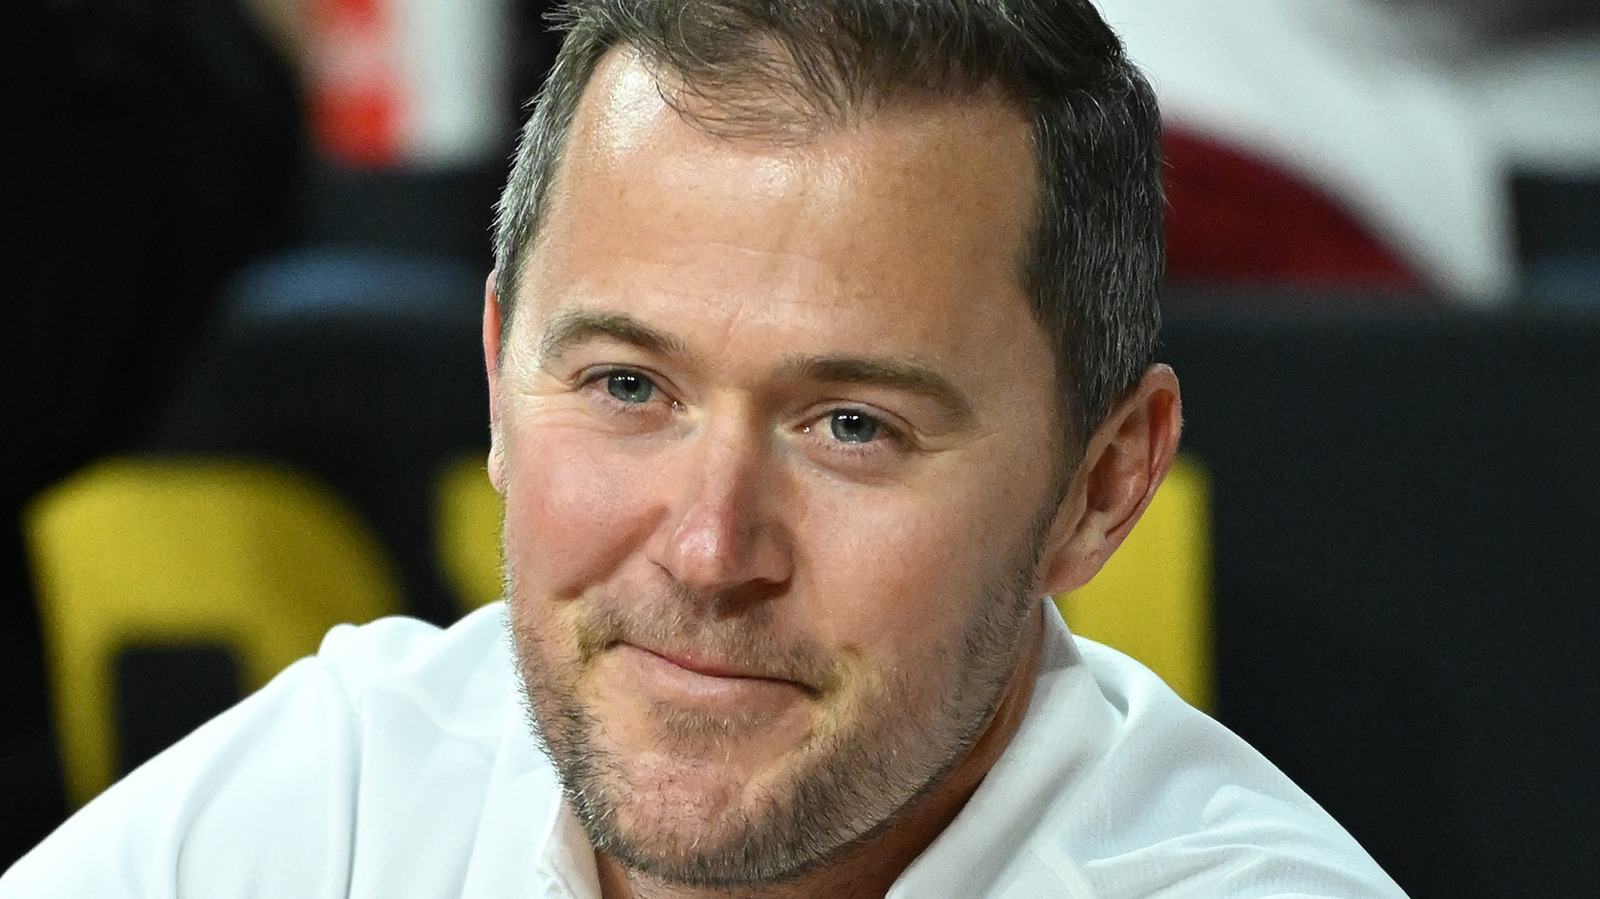 USC Football Coach Lincoln Riley Just Bought A $17 Million Mansion In LA